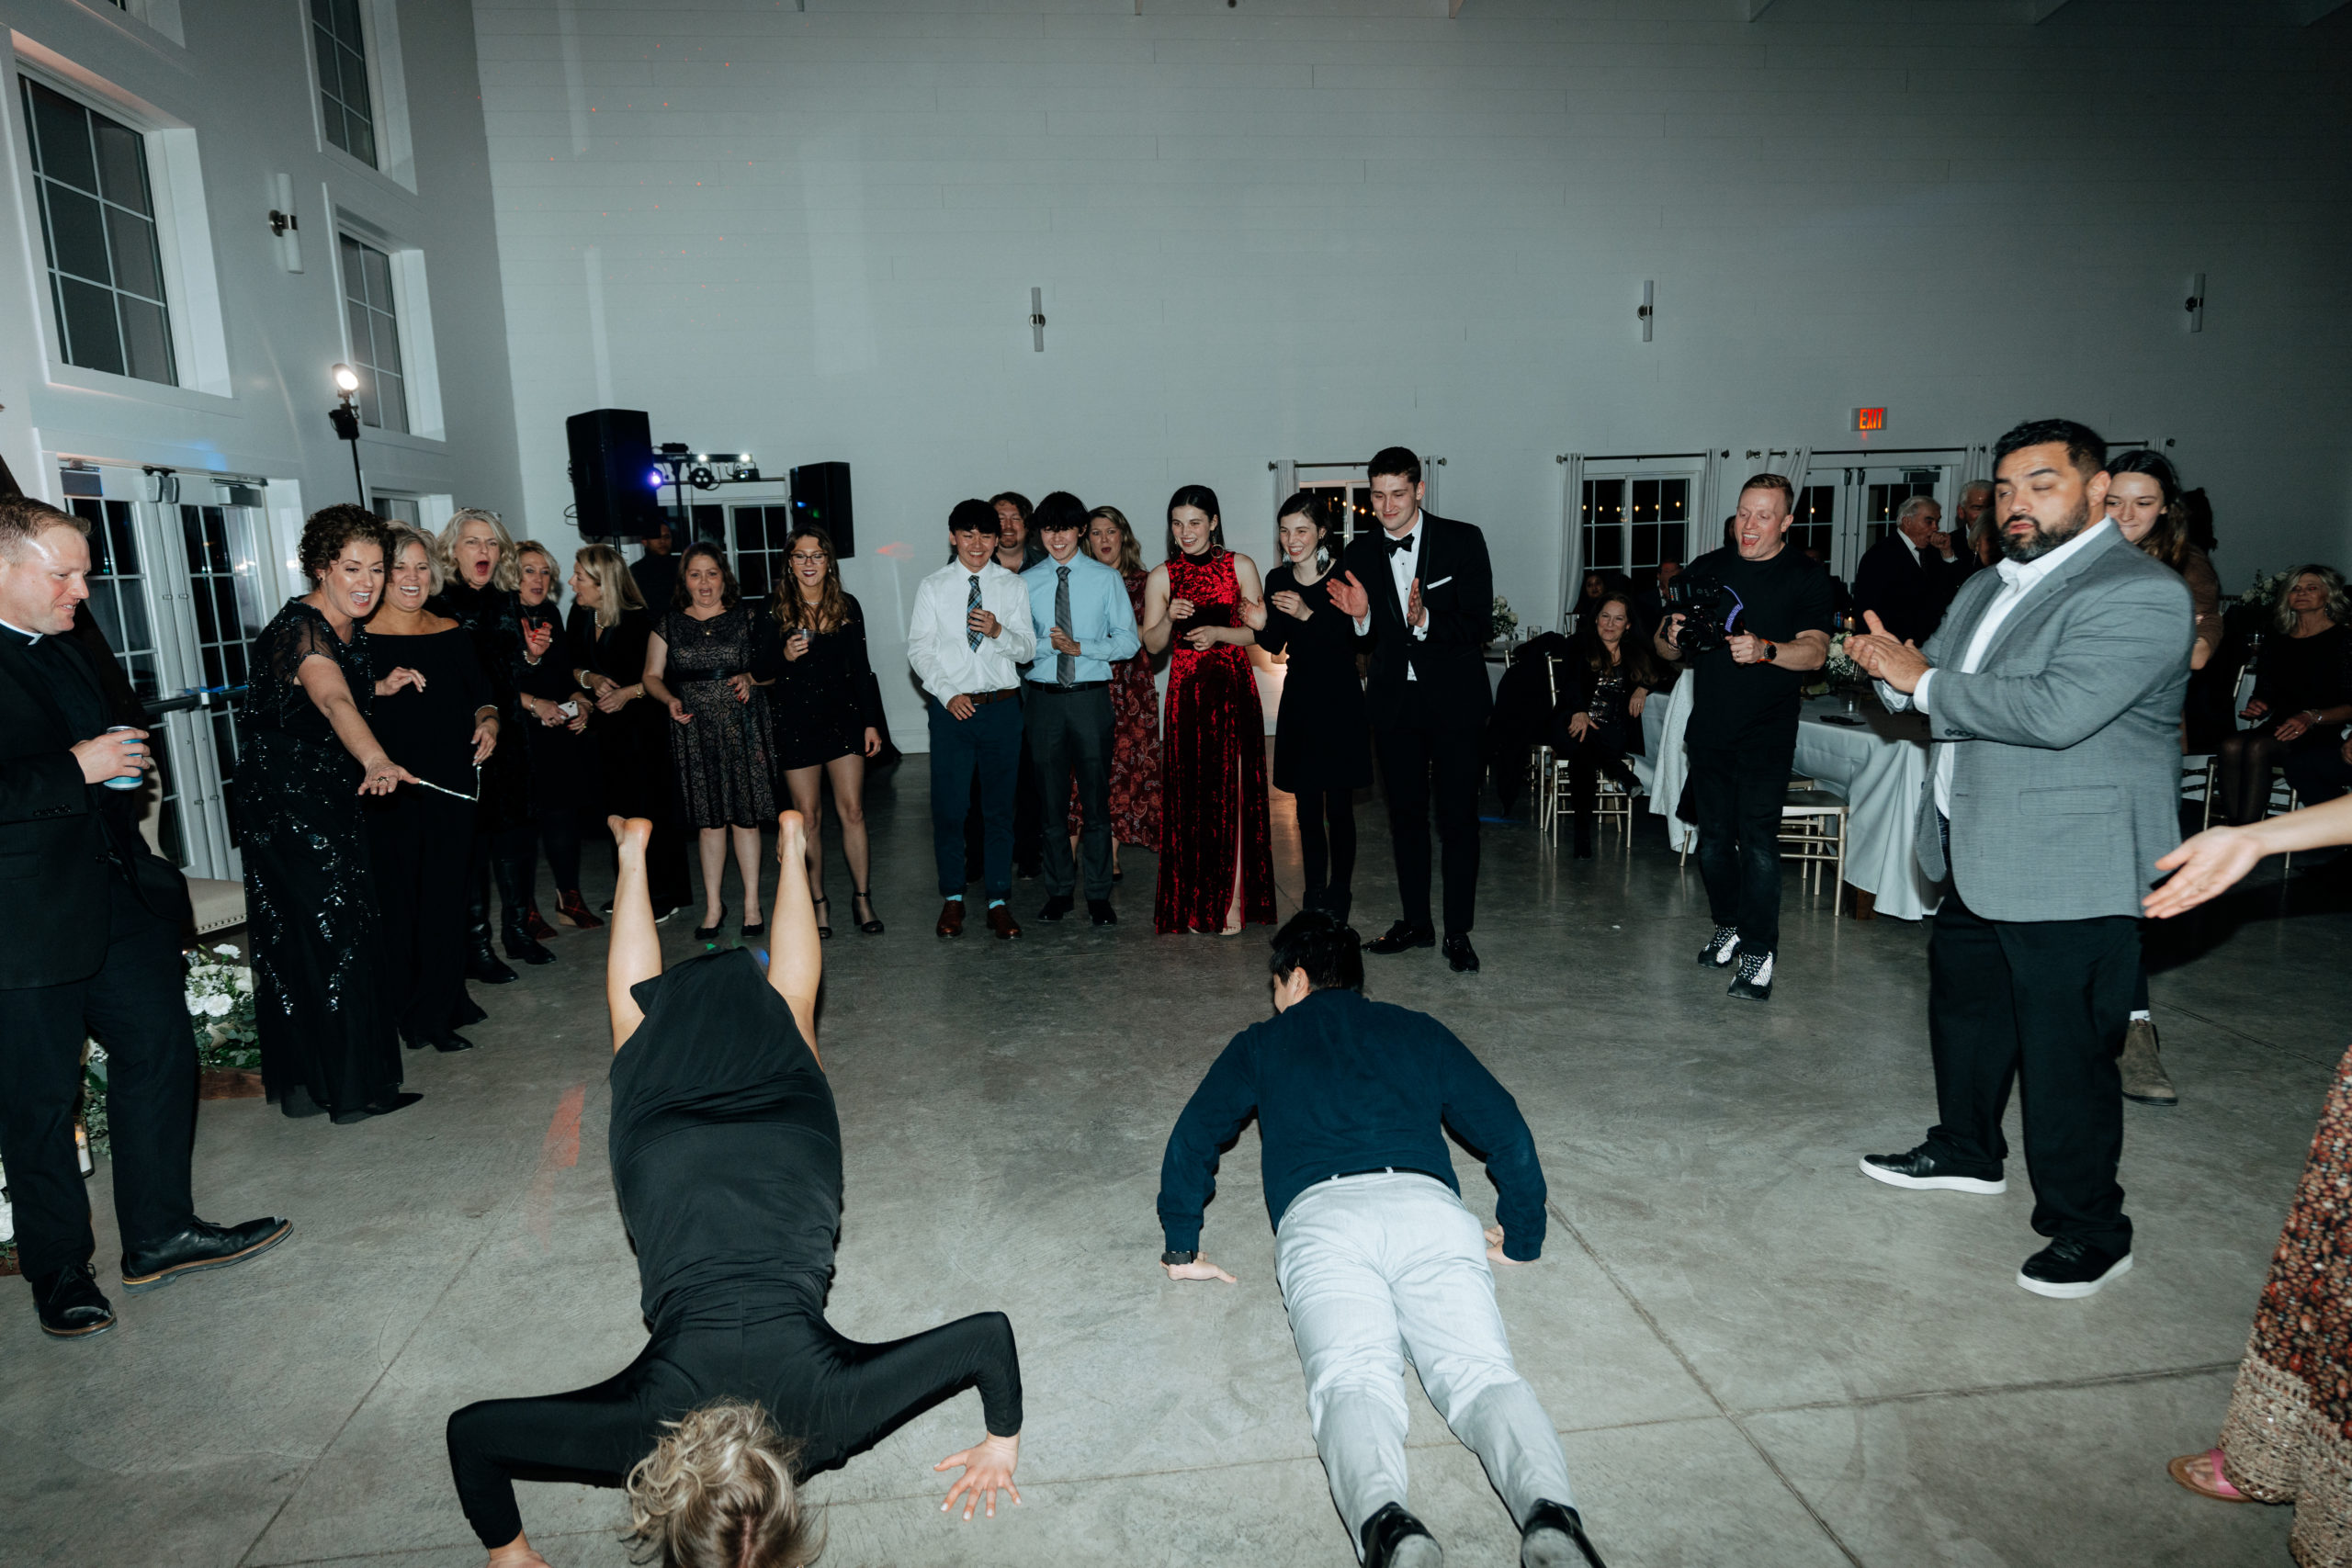 This is a picture of guests dancing at a wedding reception